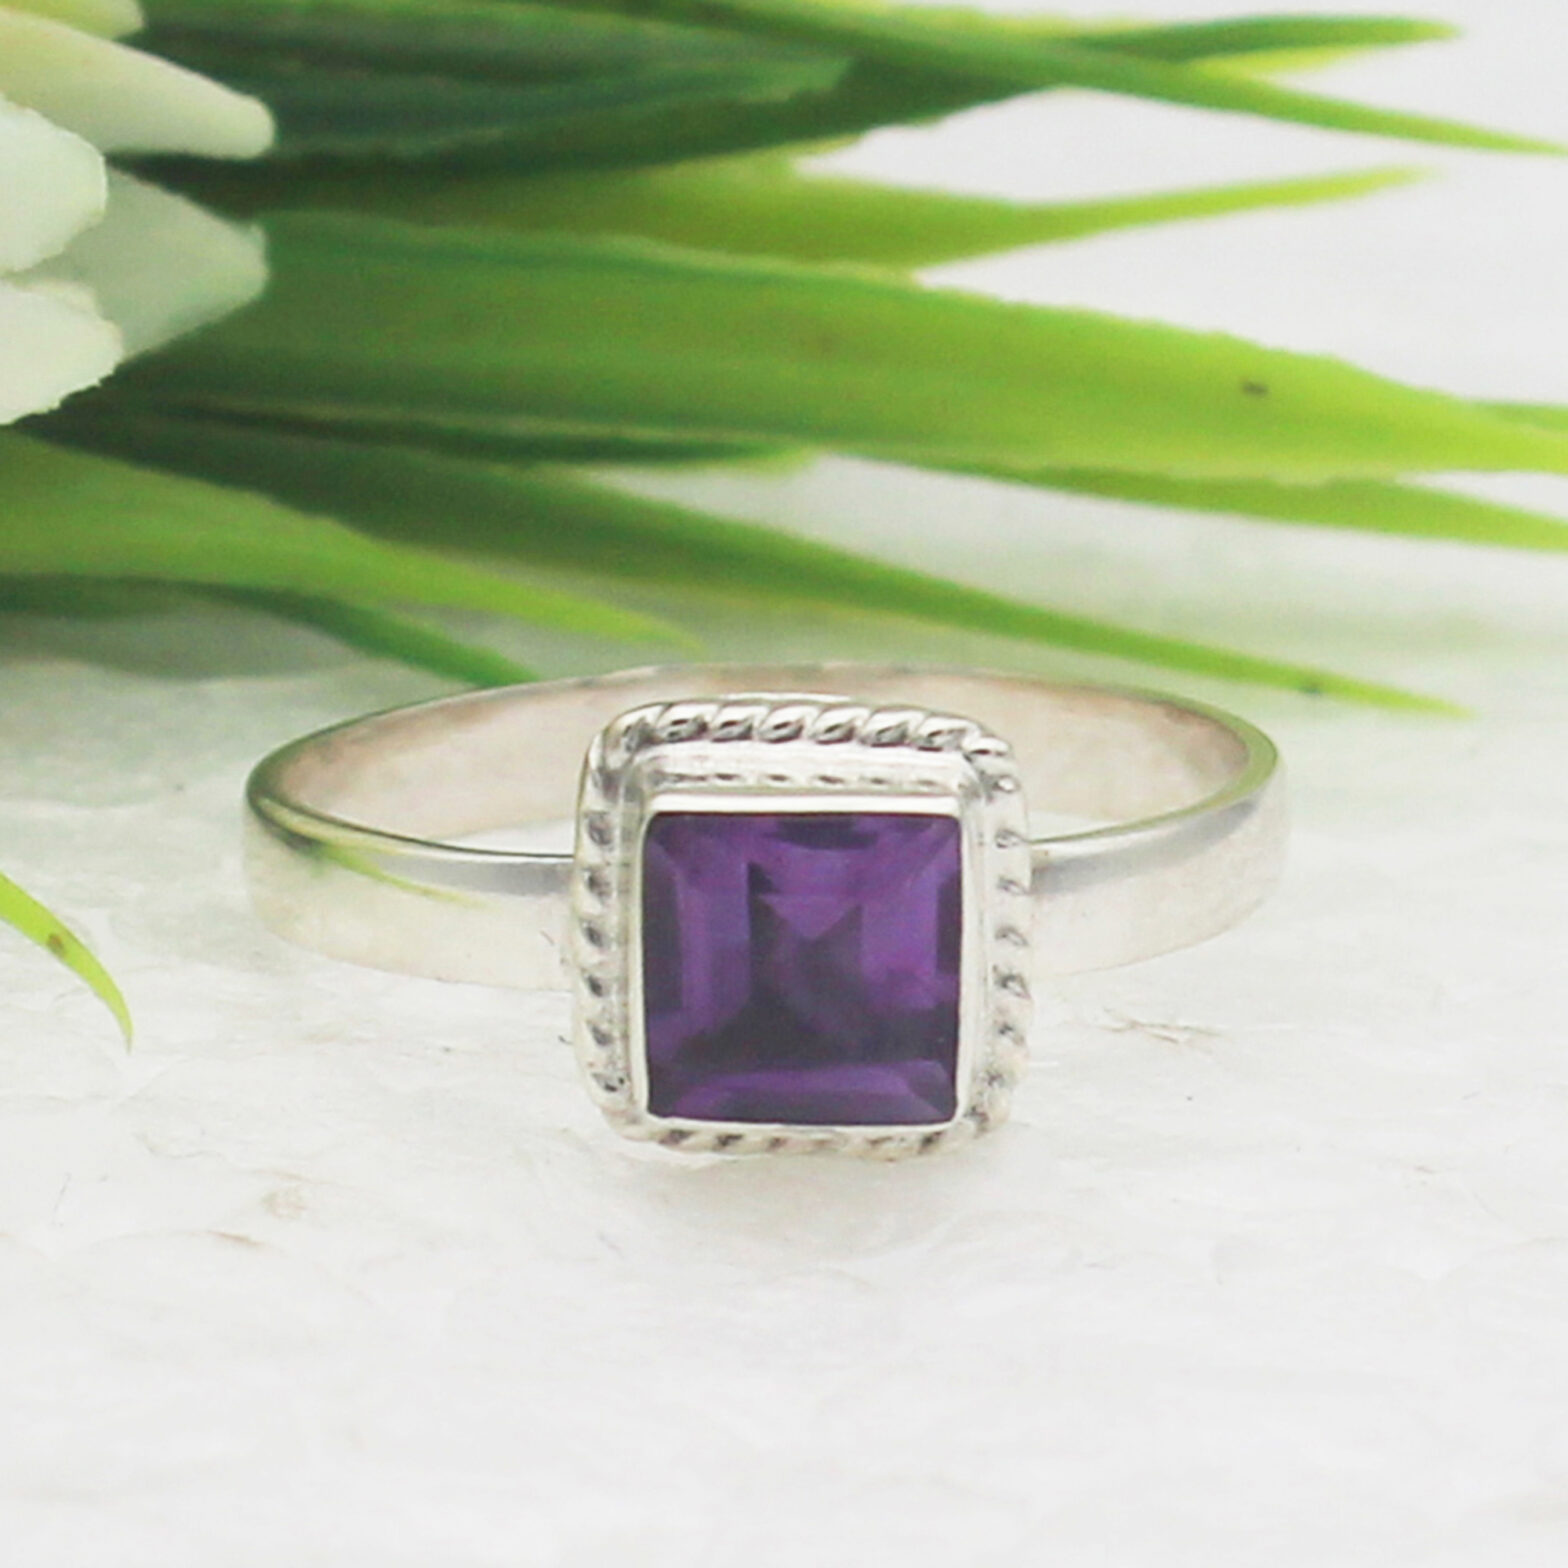 925 Sterling Silver Natural Purple Amethyst Ring, Handmade Jewelry, Gemstone Birthstone Ring, Gift For Her